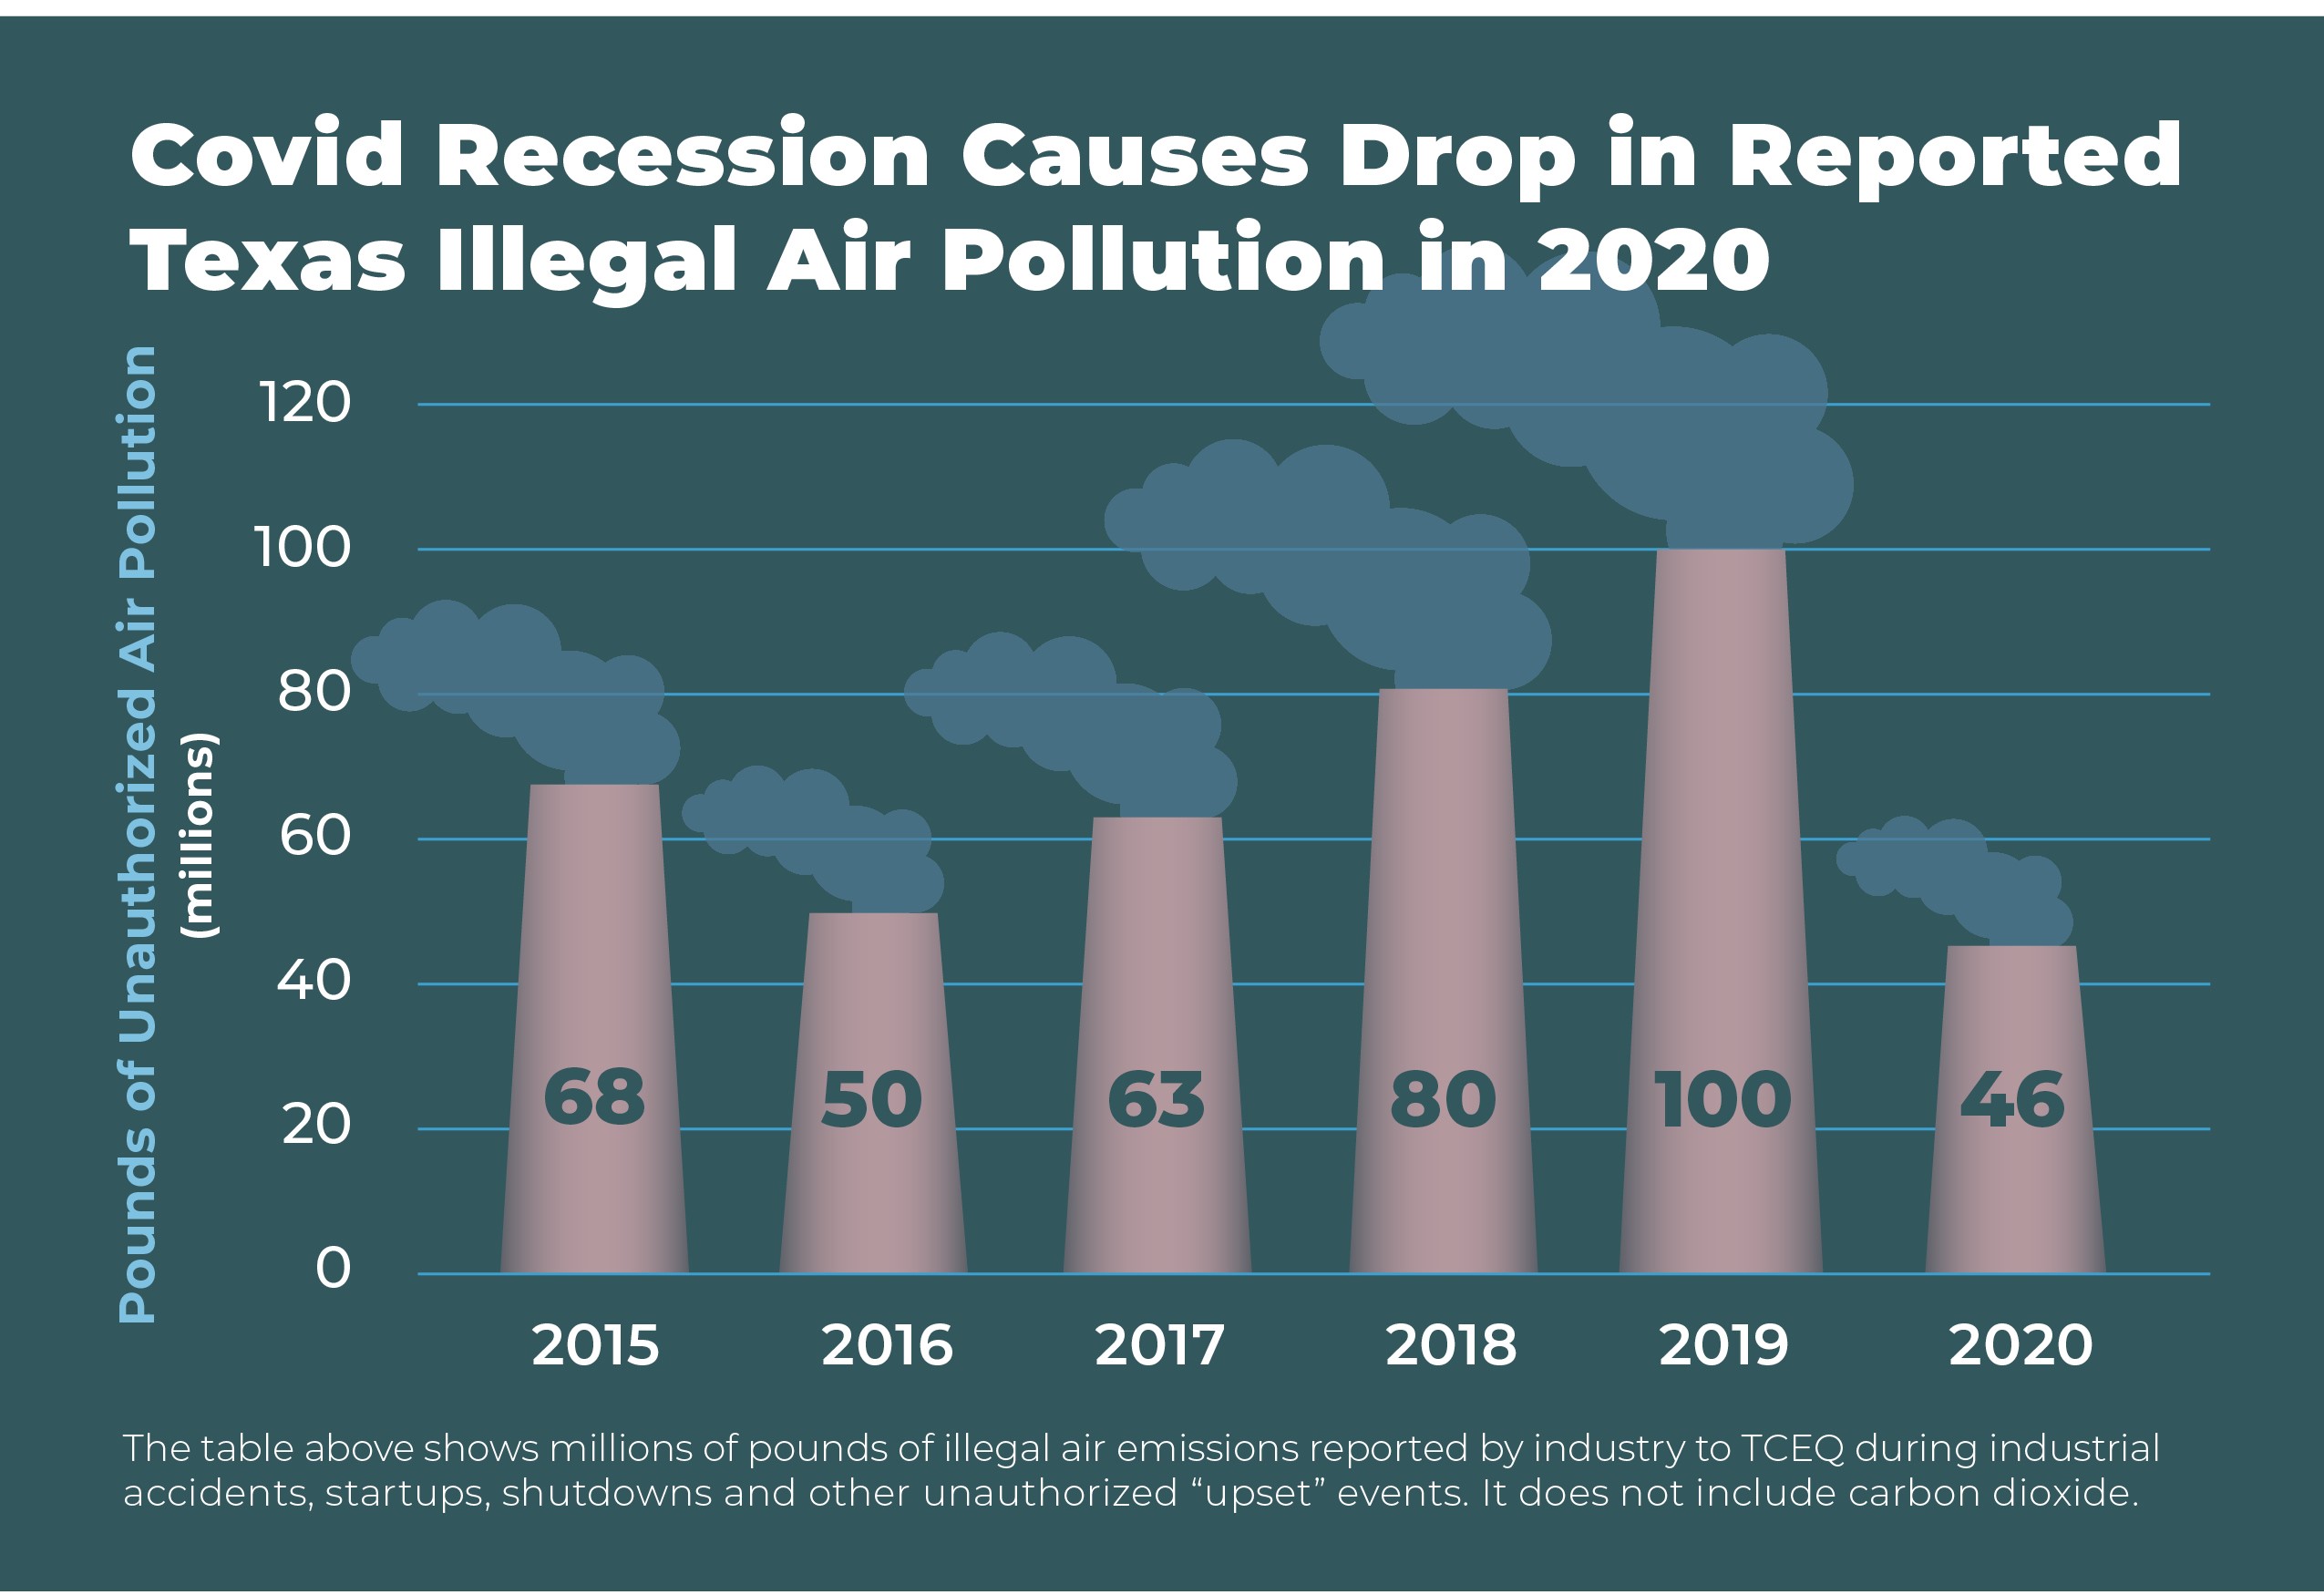 Emissions and air quality